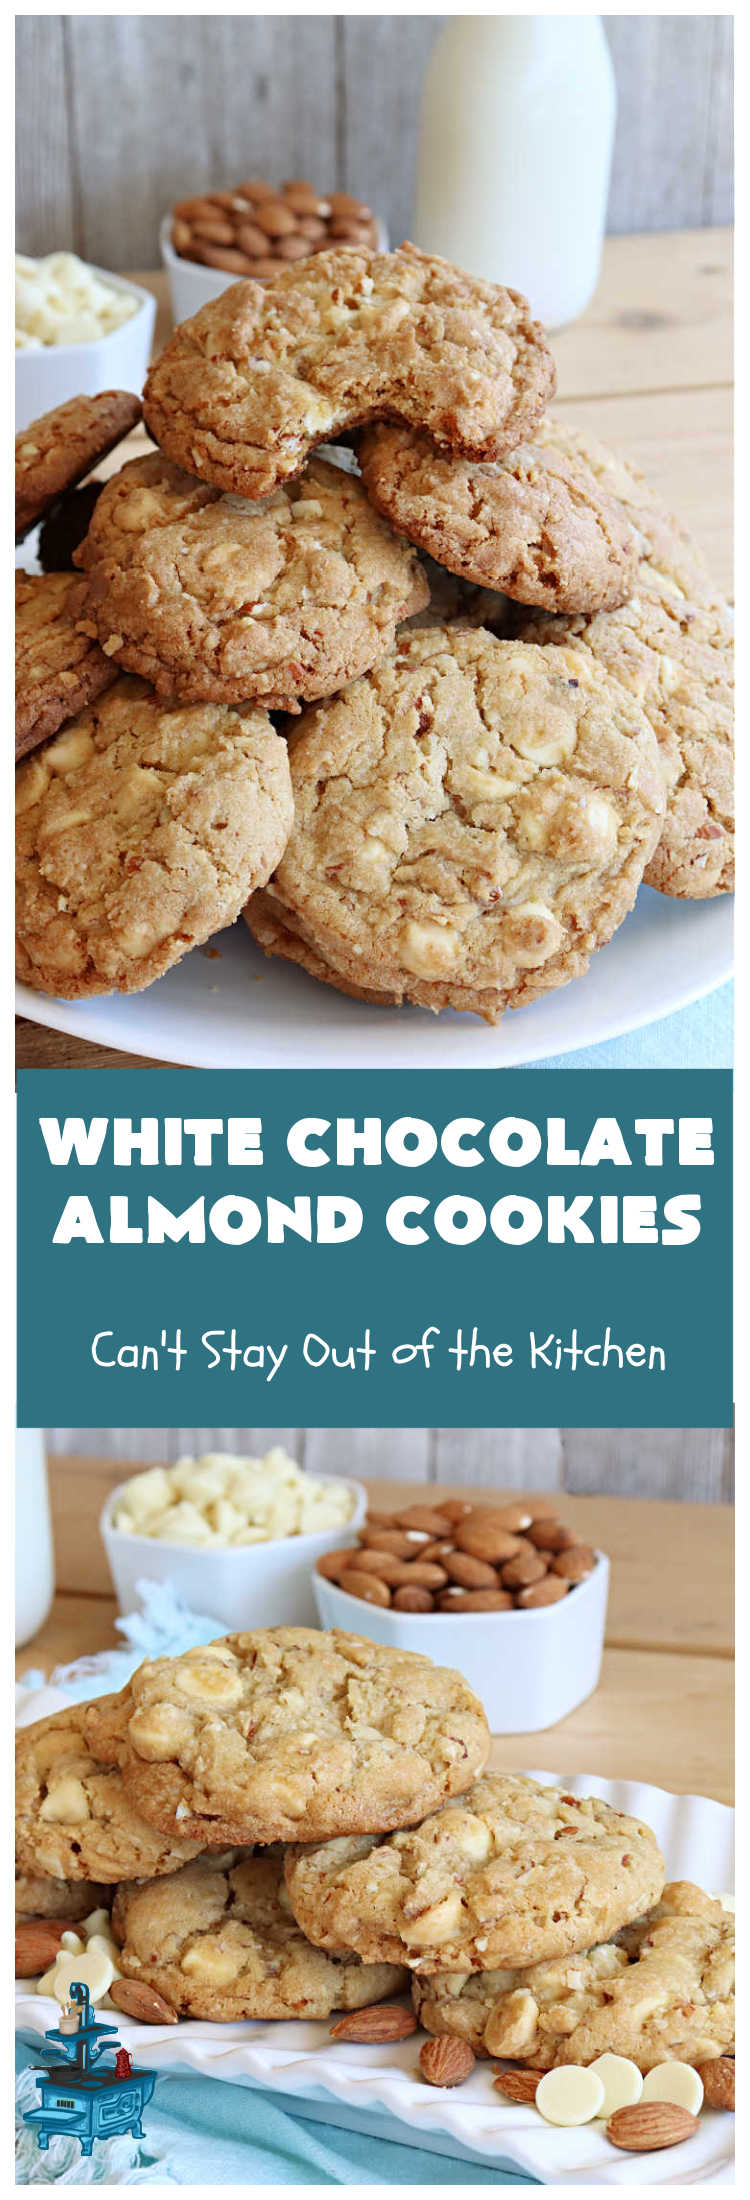 White Chocolate Almond Cookies | Can't Stay Out of the Kitchen | these delectable #cookies are made with REAL #WhiteChocolateChips not merely vanilla chips so they have that chocolaty flavor everyone loves. Plus they're chocked full of diced #almonds which add another dimension and flavor that's simply heavenly. Excellent for a potluck, #ChristmasCookieExchange or #tailgating party. Every bite will rock your world! #chocolate #dessert #HolidayDessert #ChocolateDessert #WhiteChocolateAlmondCookies